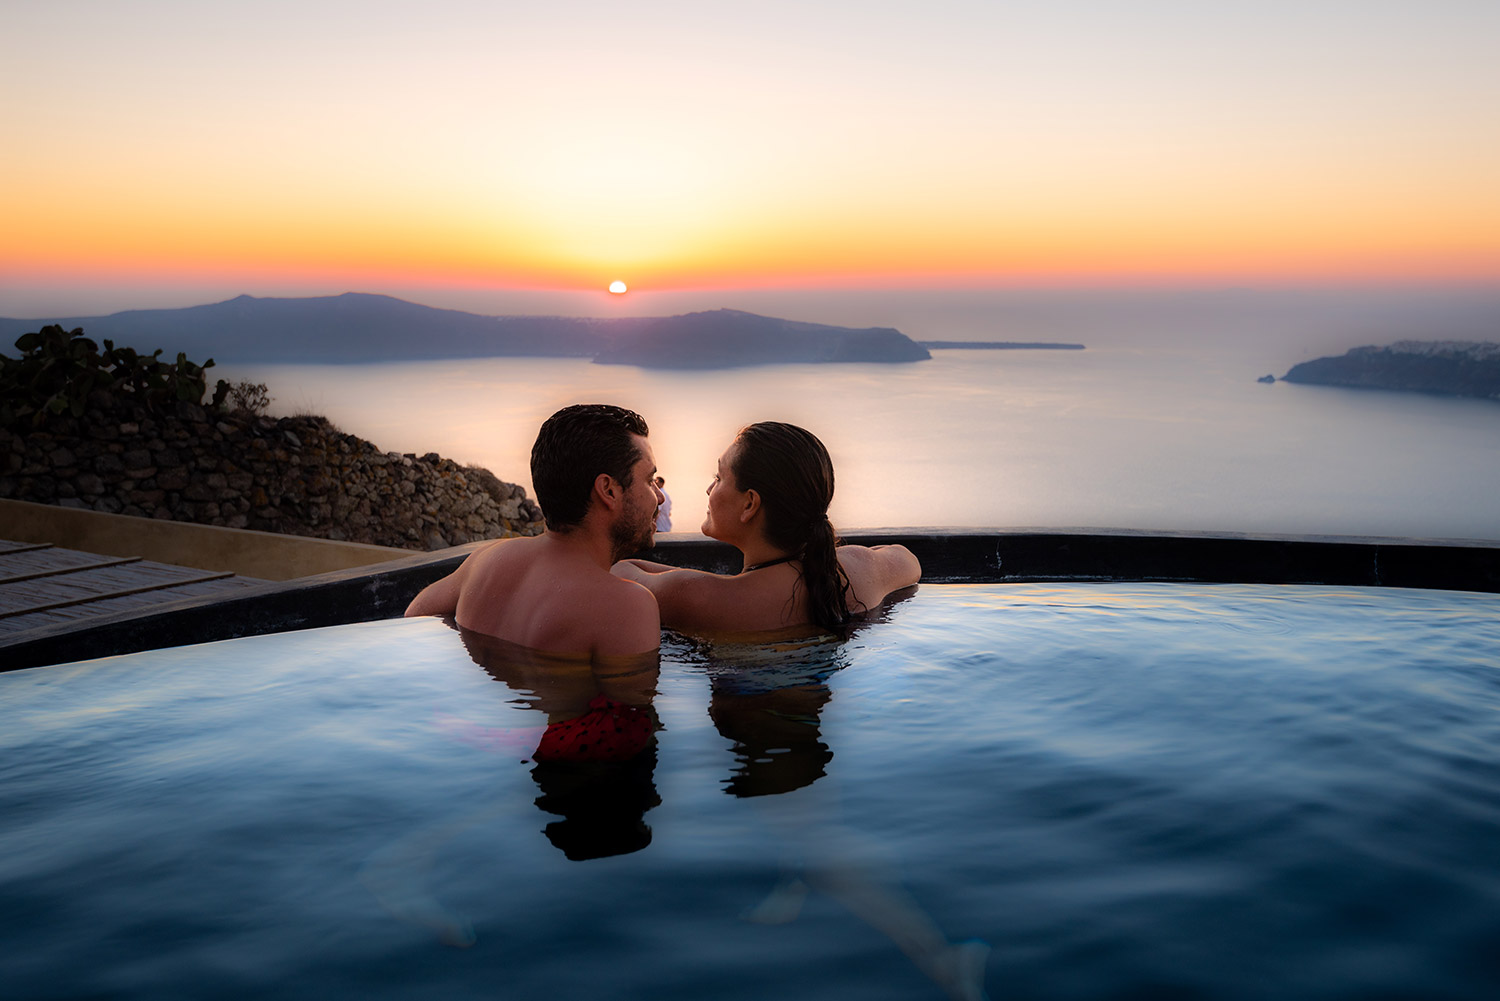  Luxury Hotels   Andronis Concept: A Santorini Luxury Hotel Focused on Wellness    Read our Review  